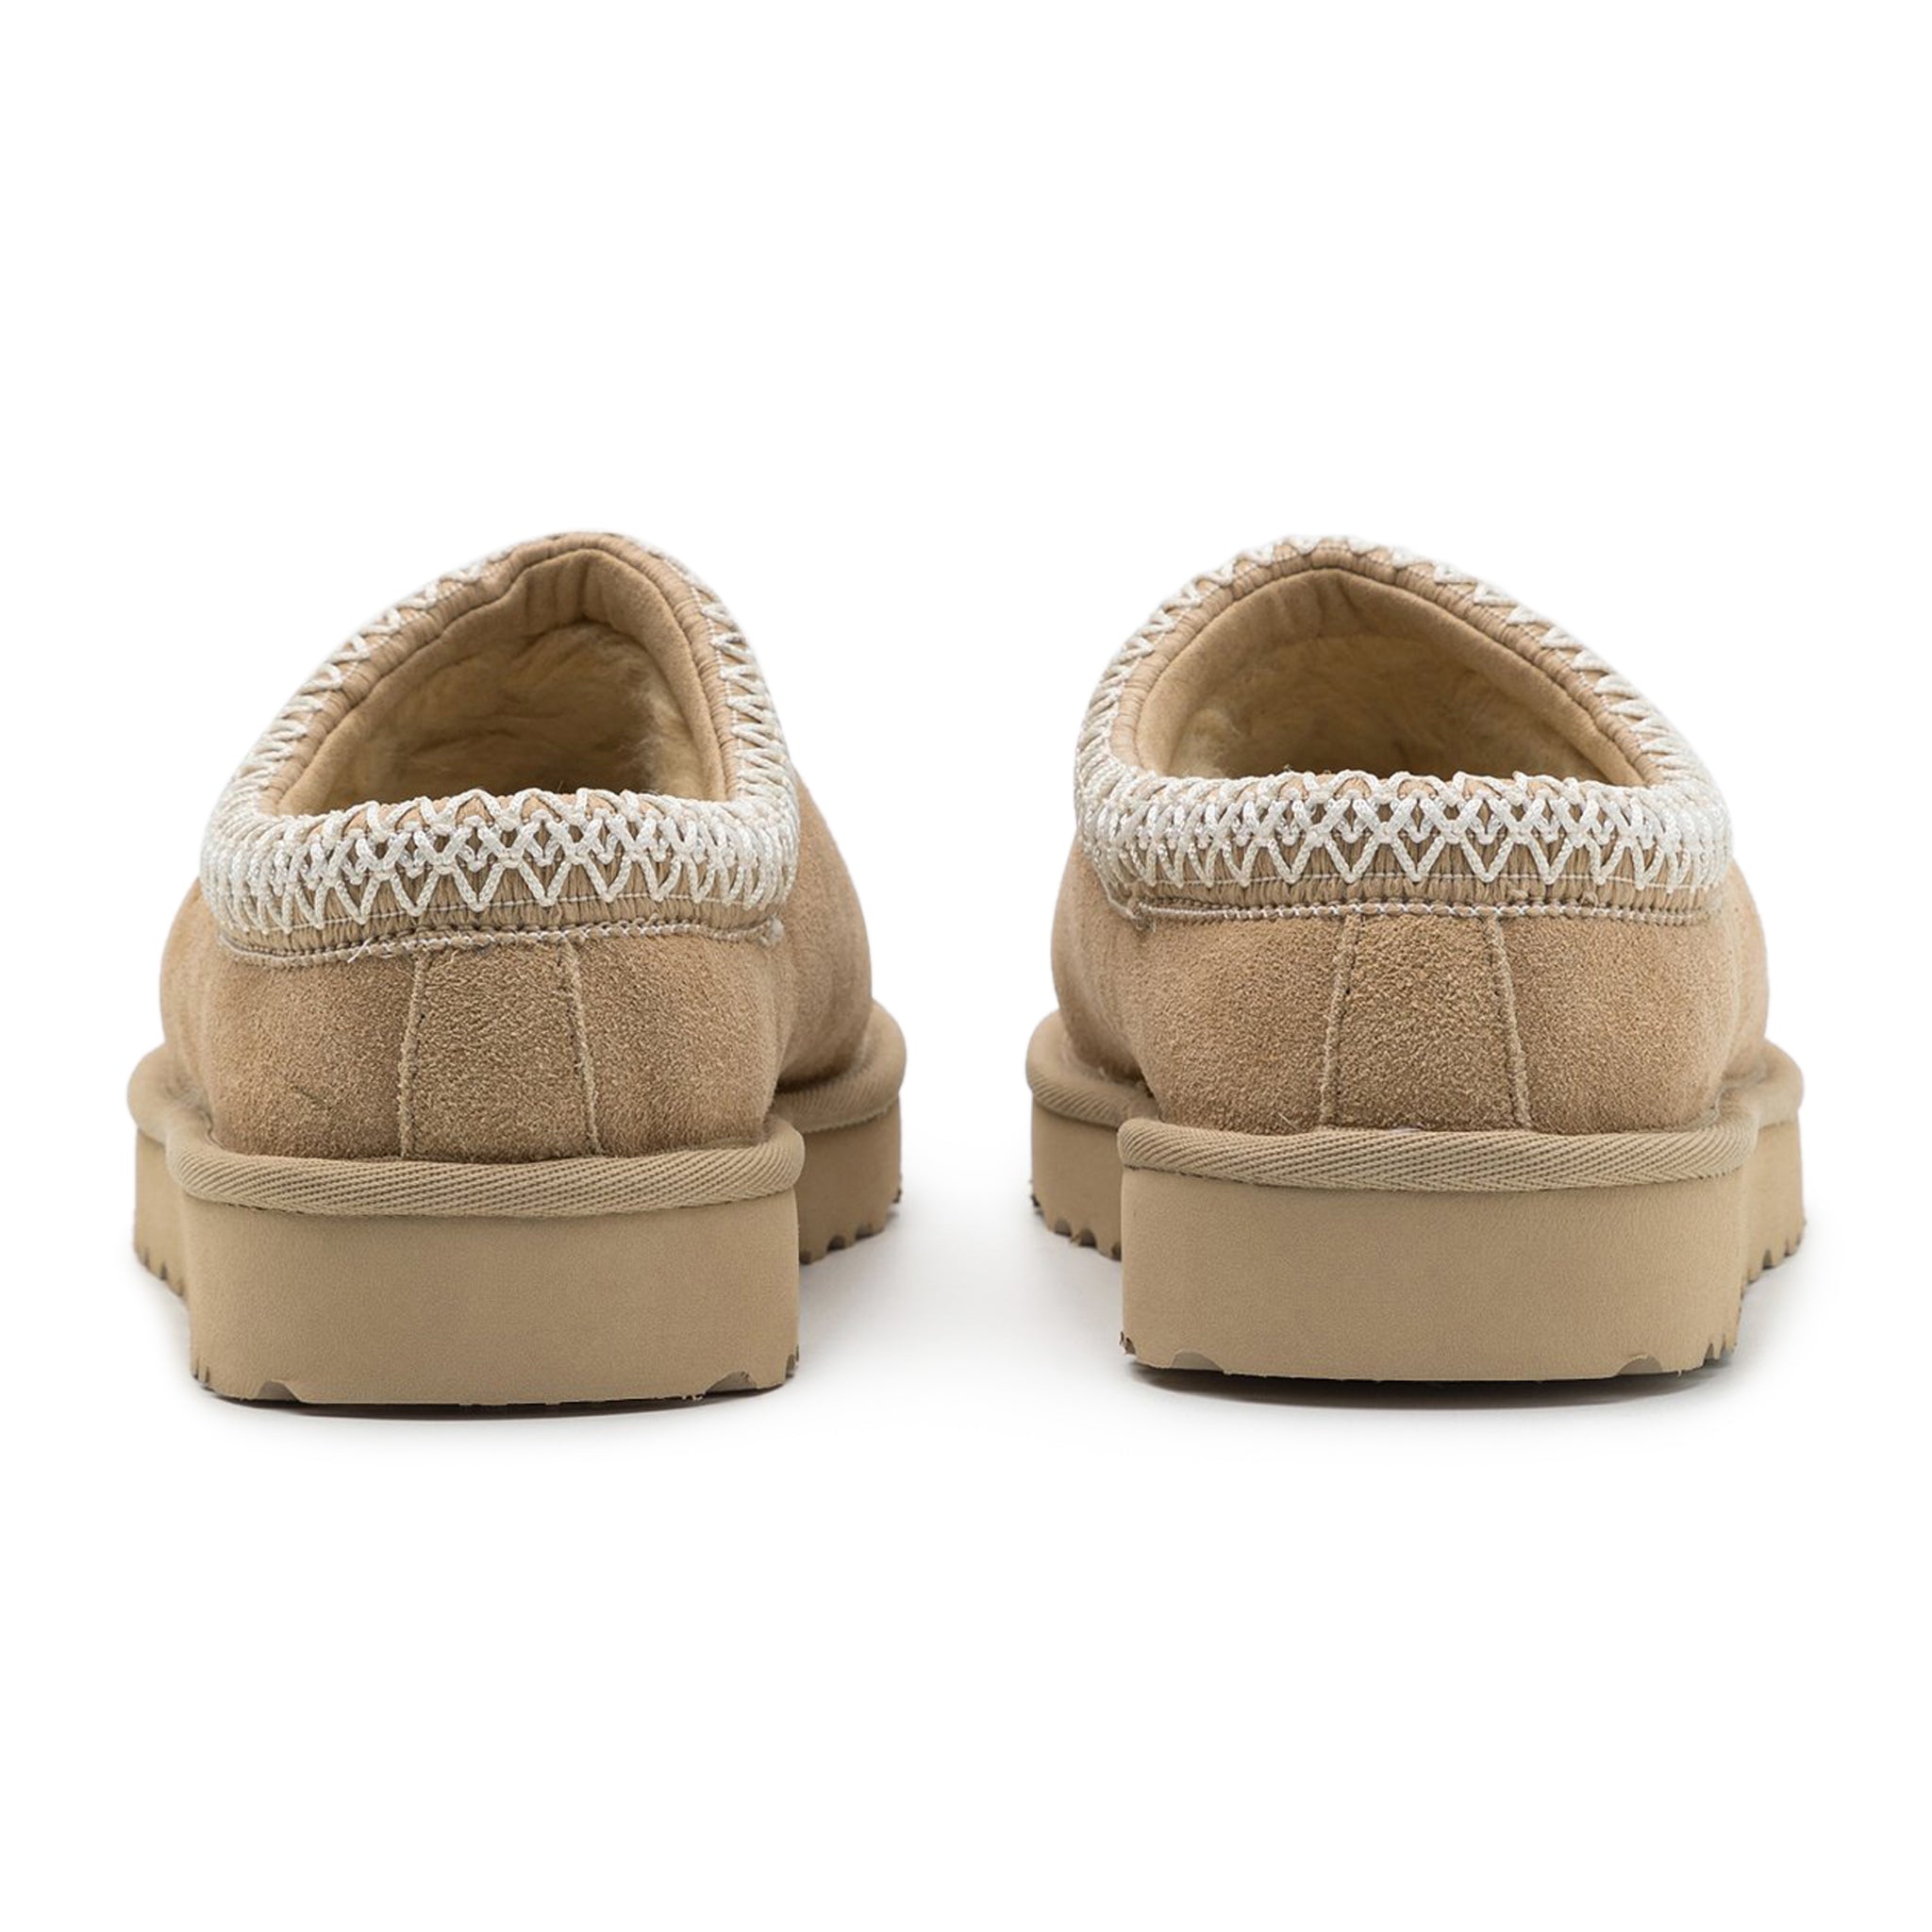 Back view of UGG Tasman Mustard Seed Slippers (W) 5955-MSWH